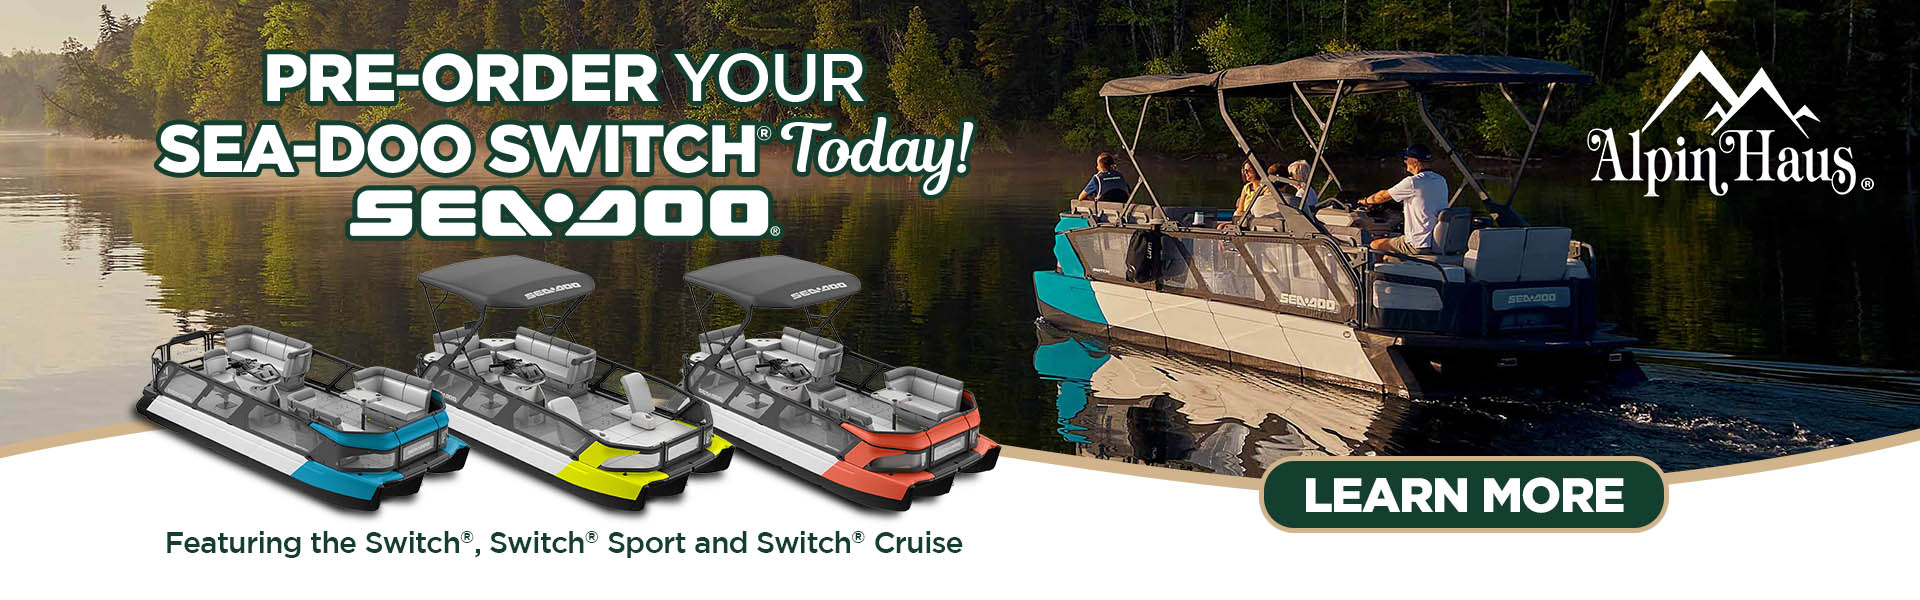 Seadoo Switch Preorder